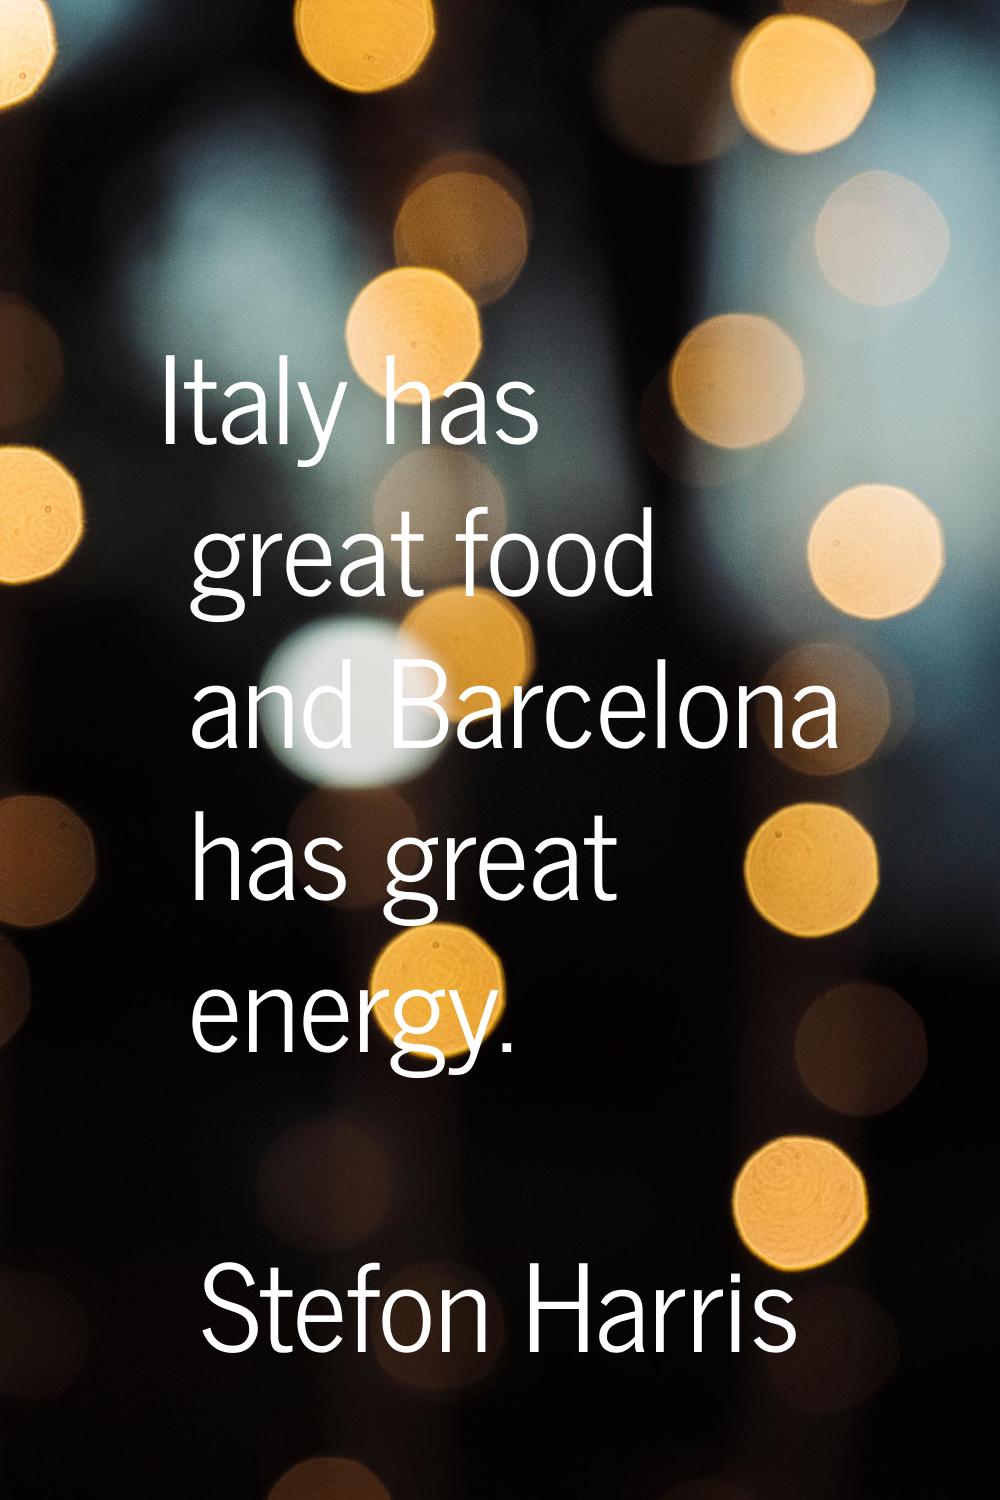 Italy has great food and Barcelona has great energy.